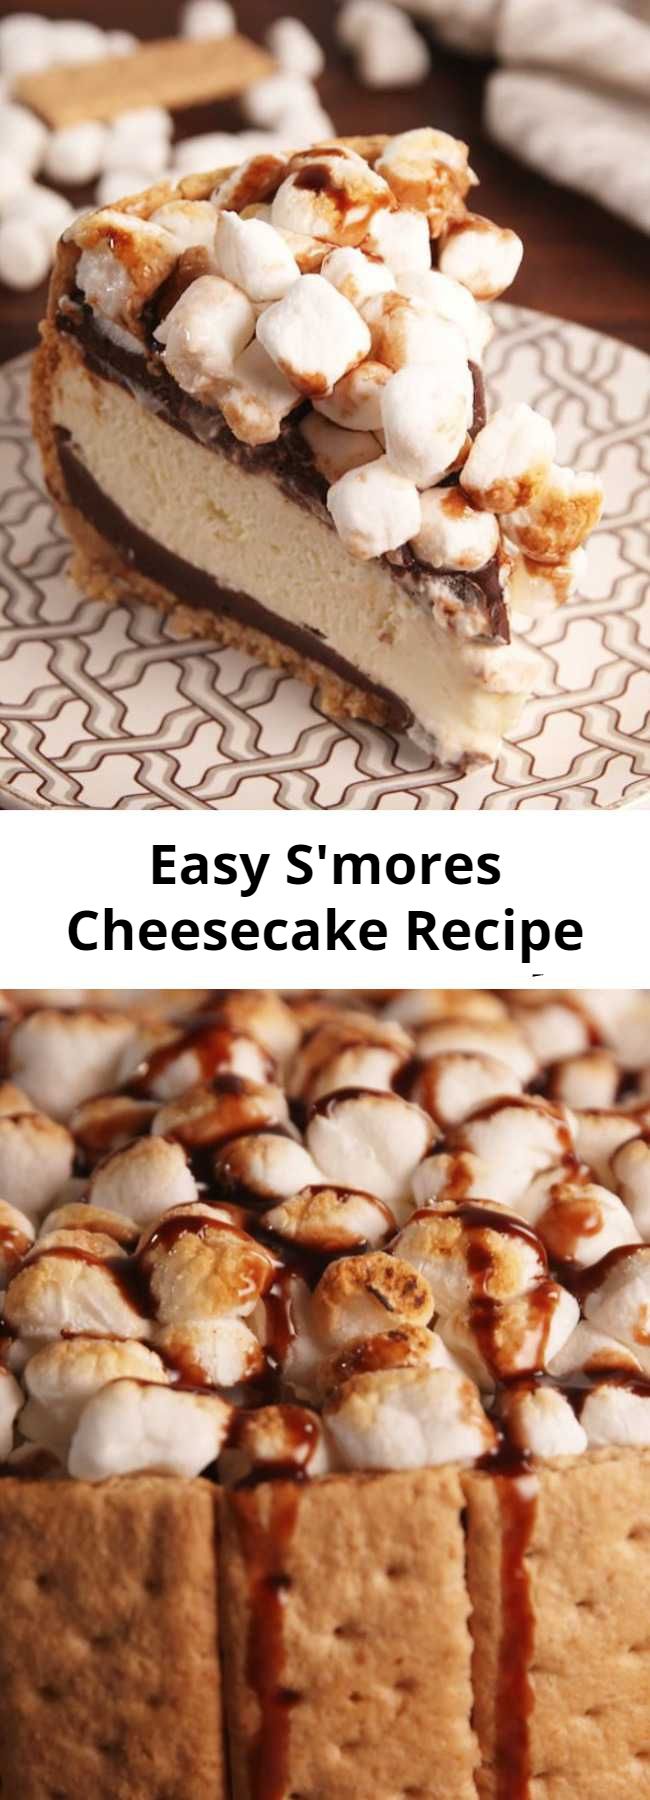 Easy S'mores Cheesecake Recipe - S'mores make everything better, even cheesecake. Take the camping party indoors with this s'mores cheesecake.